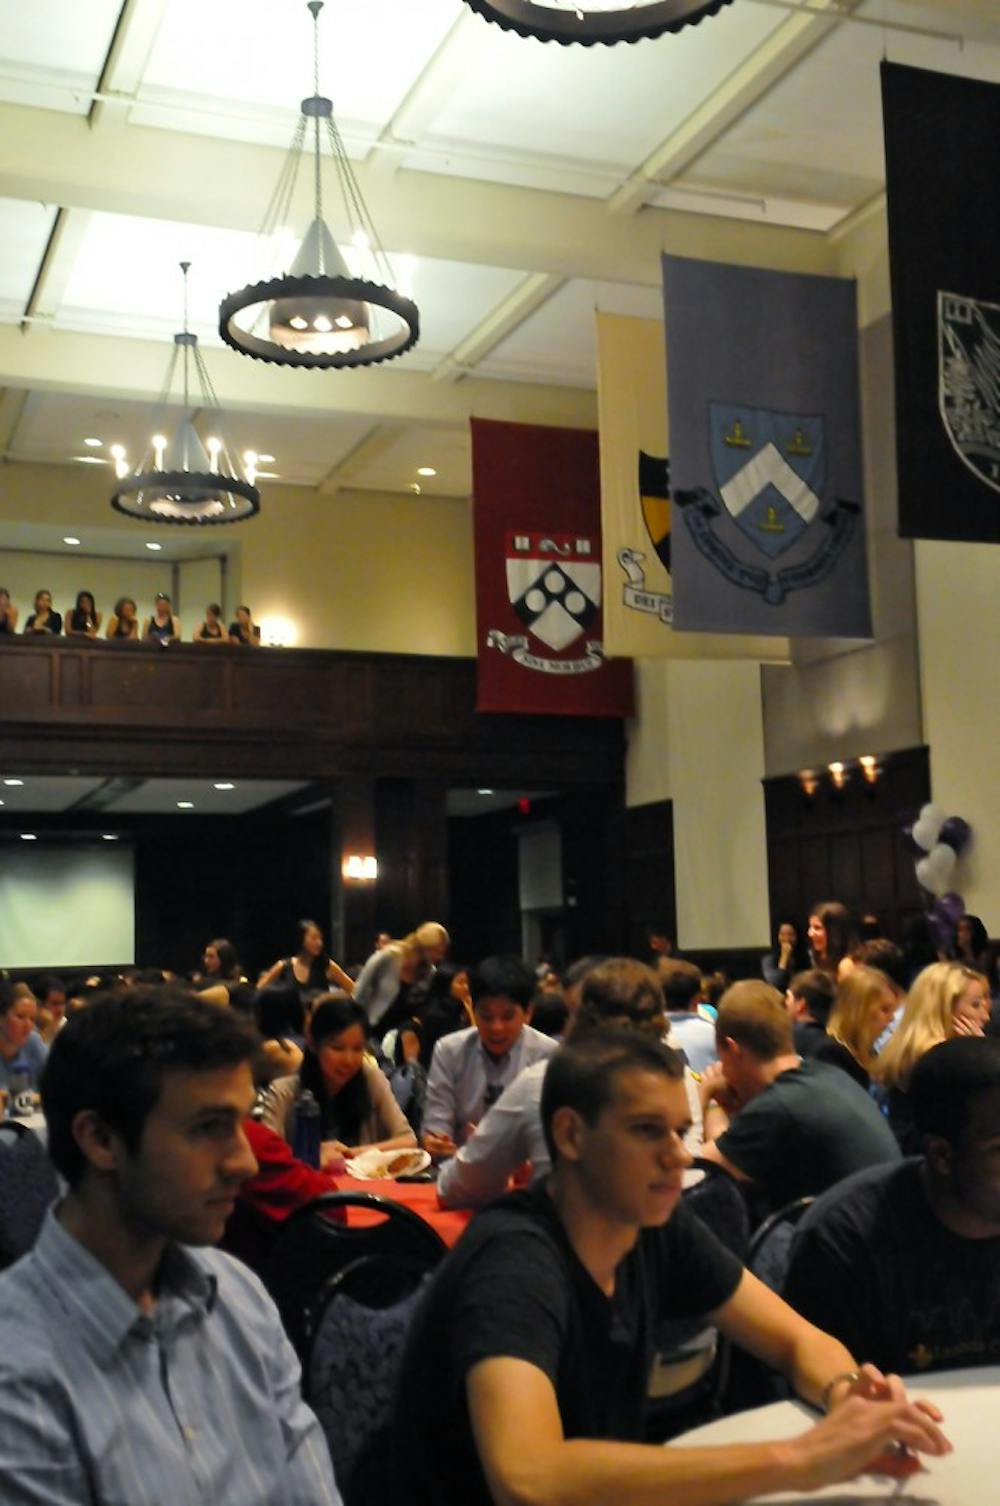 Sigma Kappa Sorority hosts Quizzo in Houston Hall to raise money for Alzheimer's research